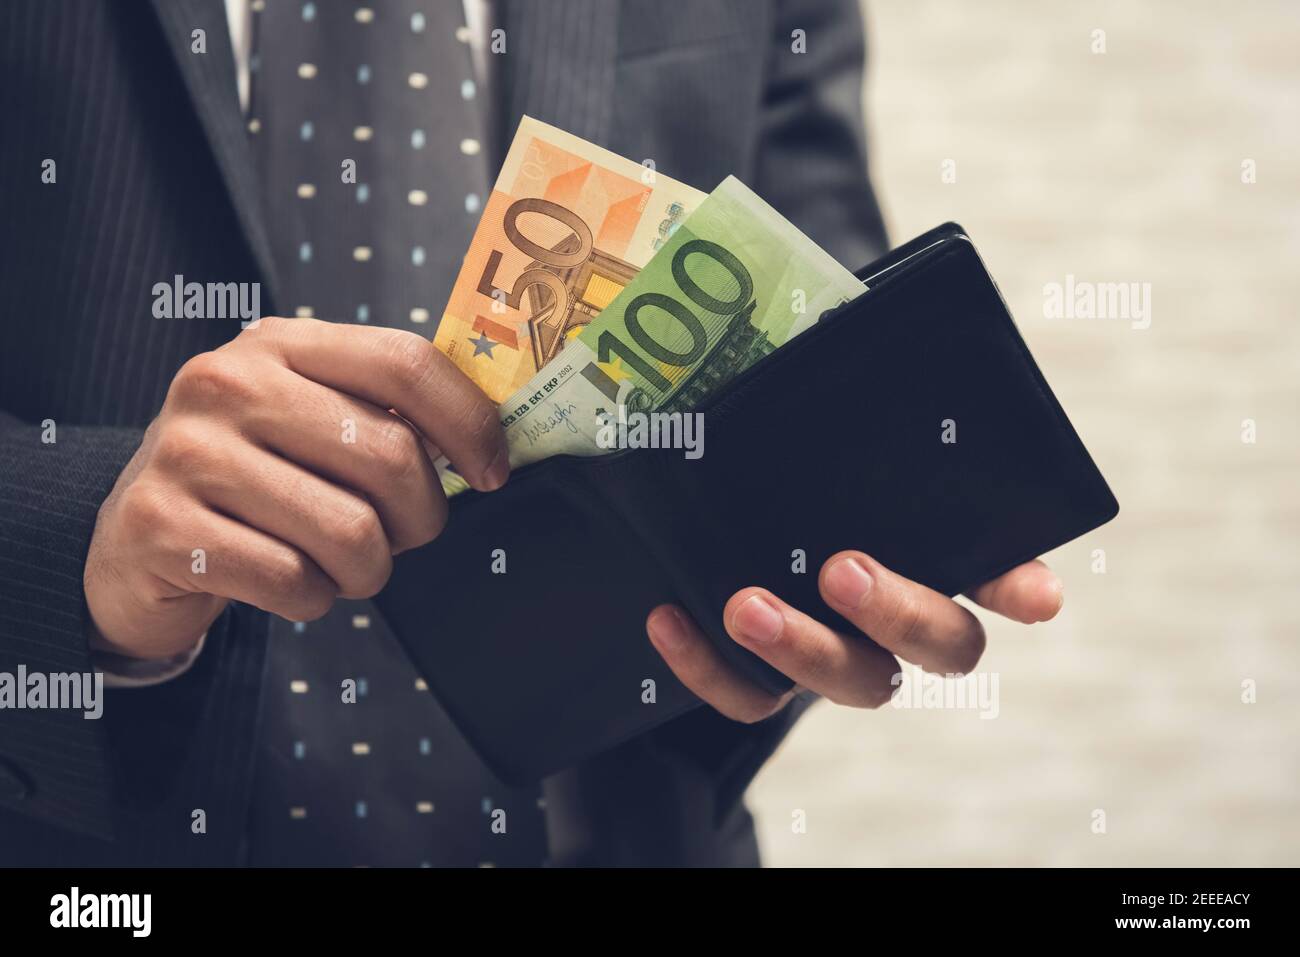 Businessman opening wallet and taking out some money, Euro currency Stock Photo